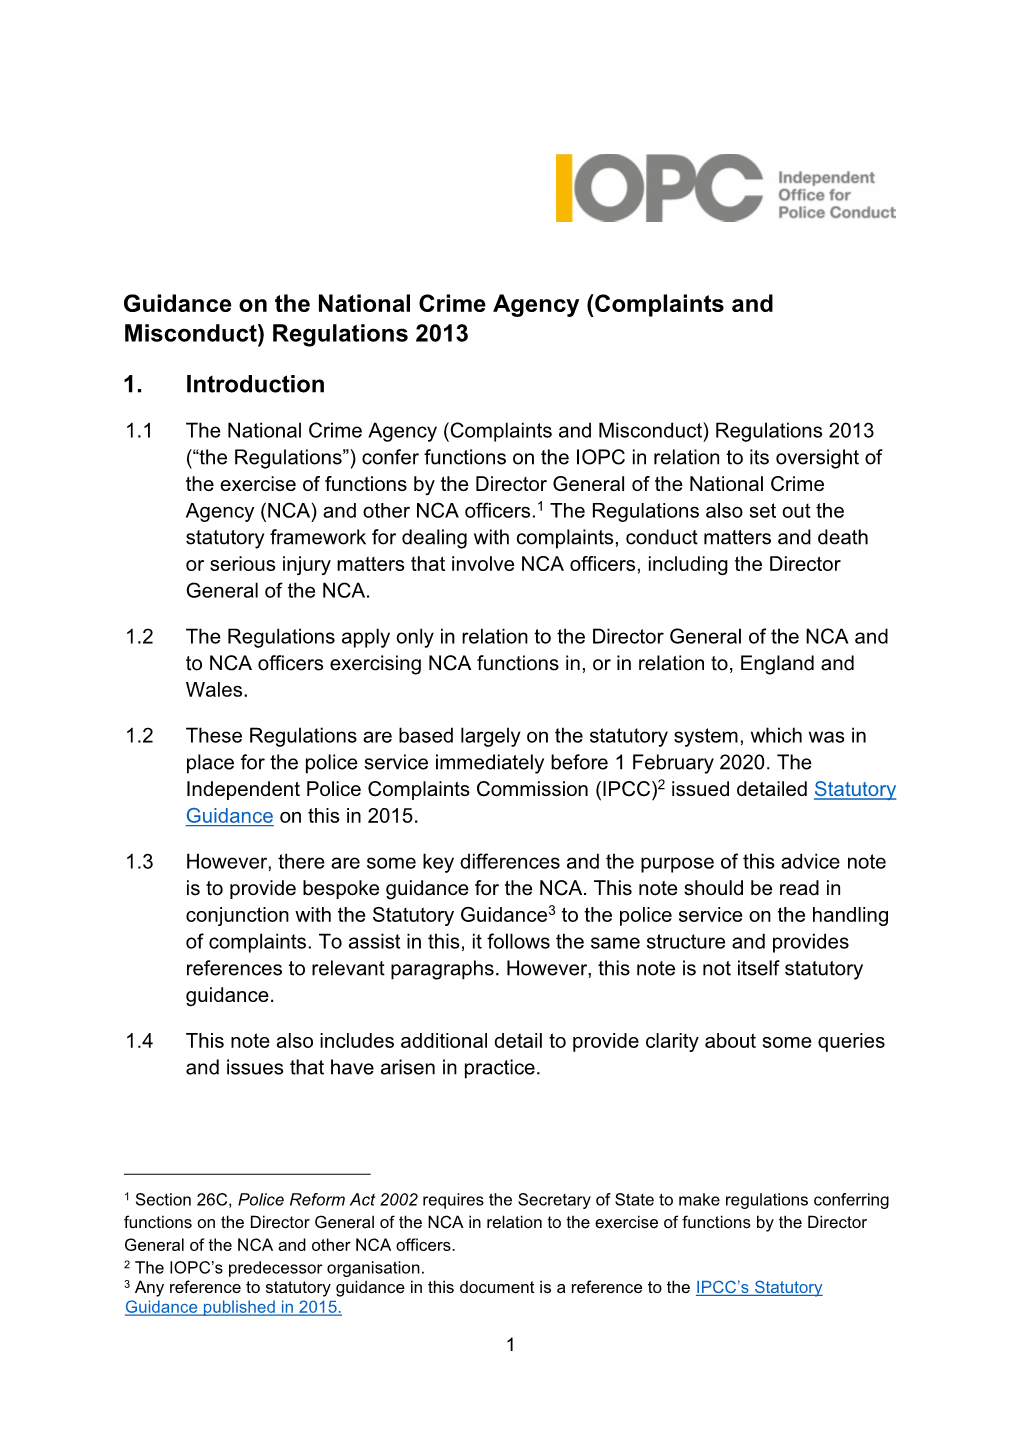 Guidance on the National Crime Agency (Complaints and Misconduct) Regulations 2013